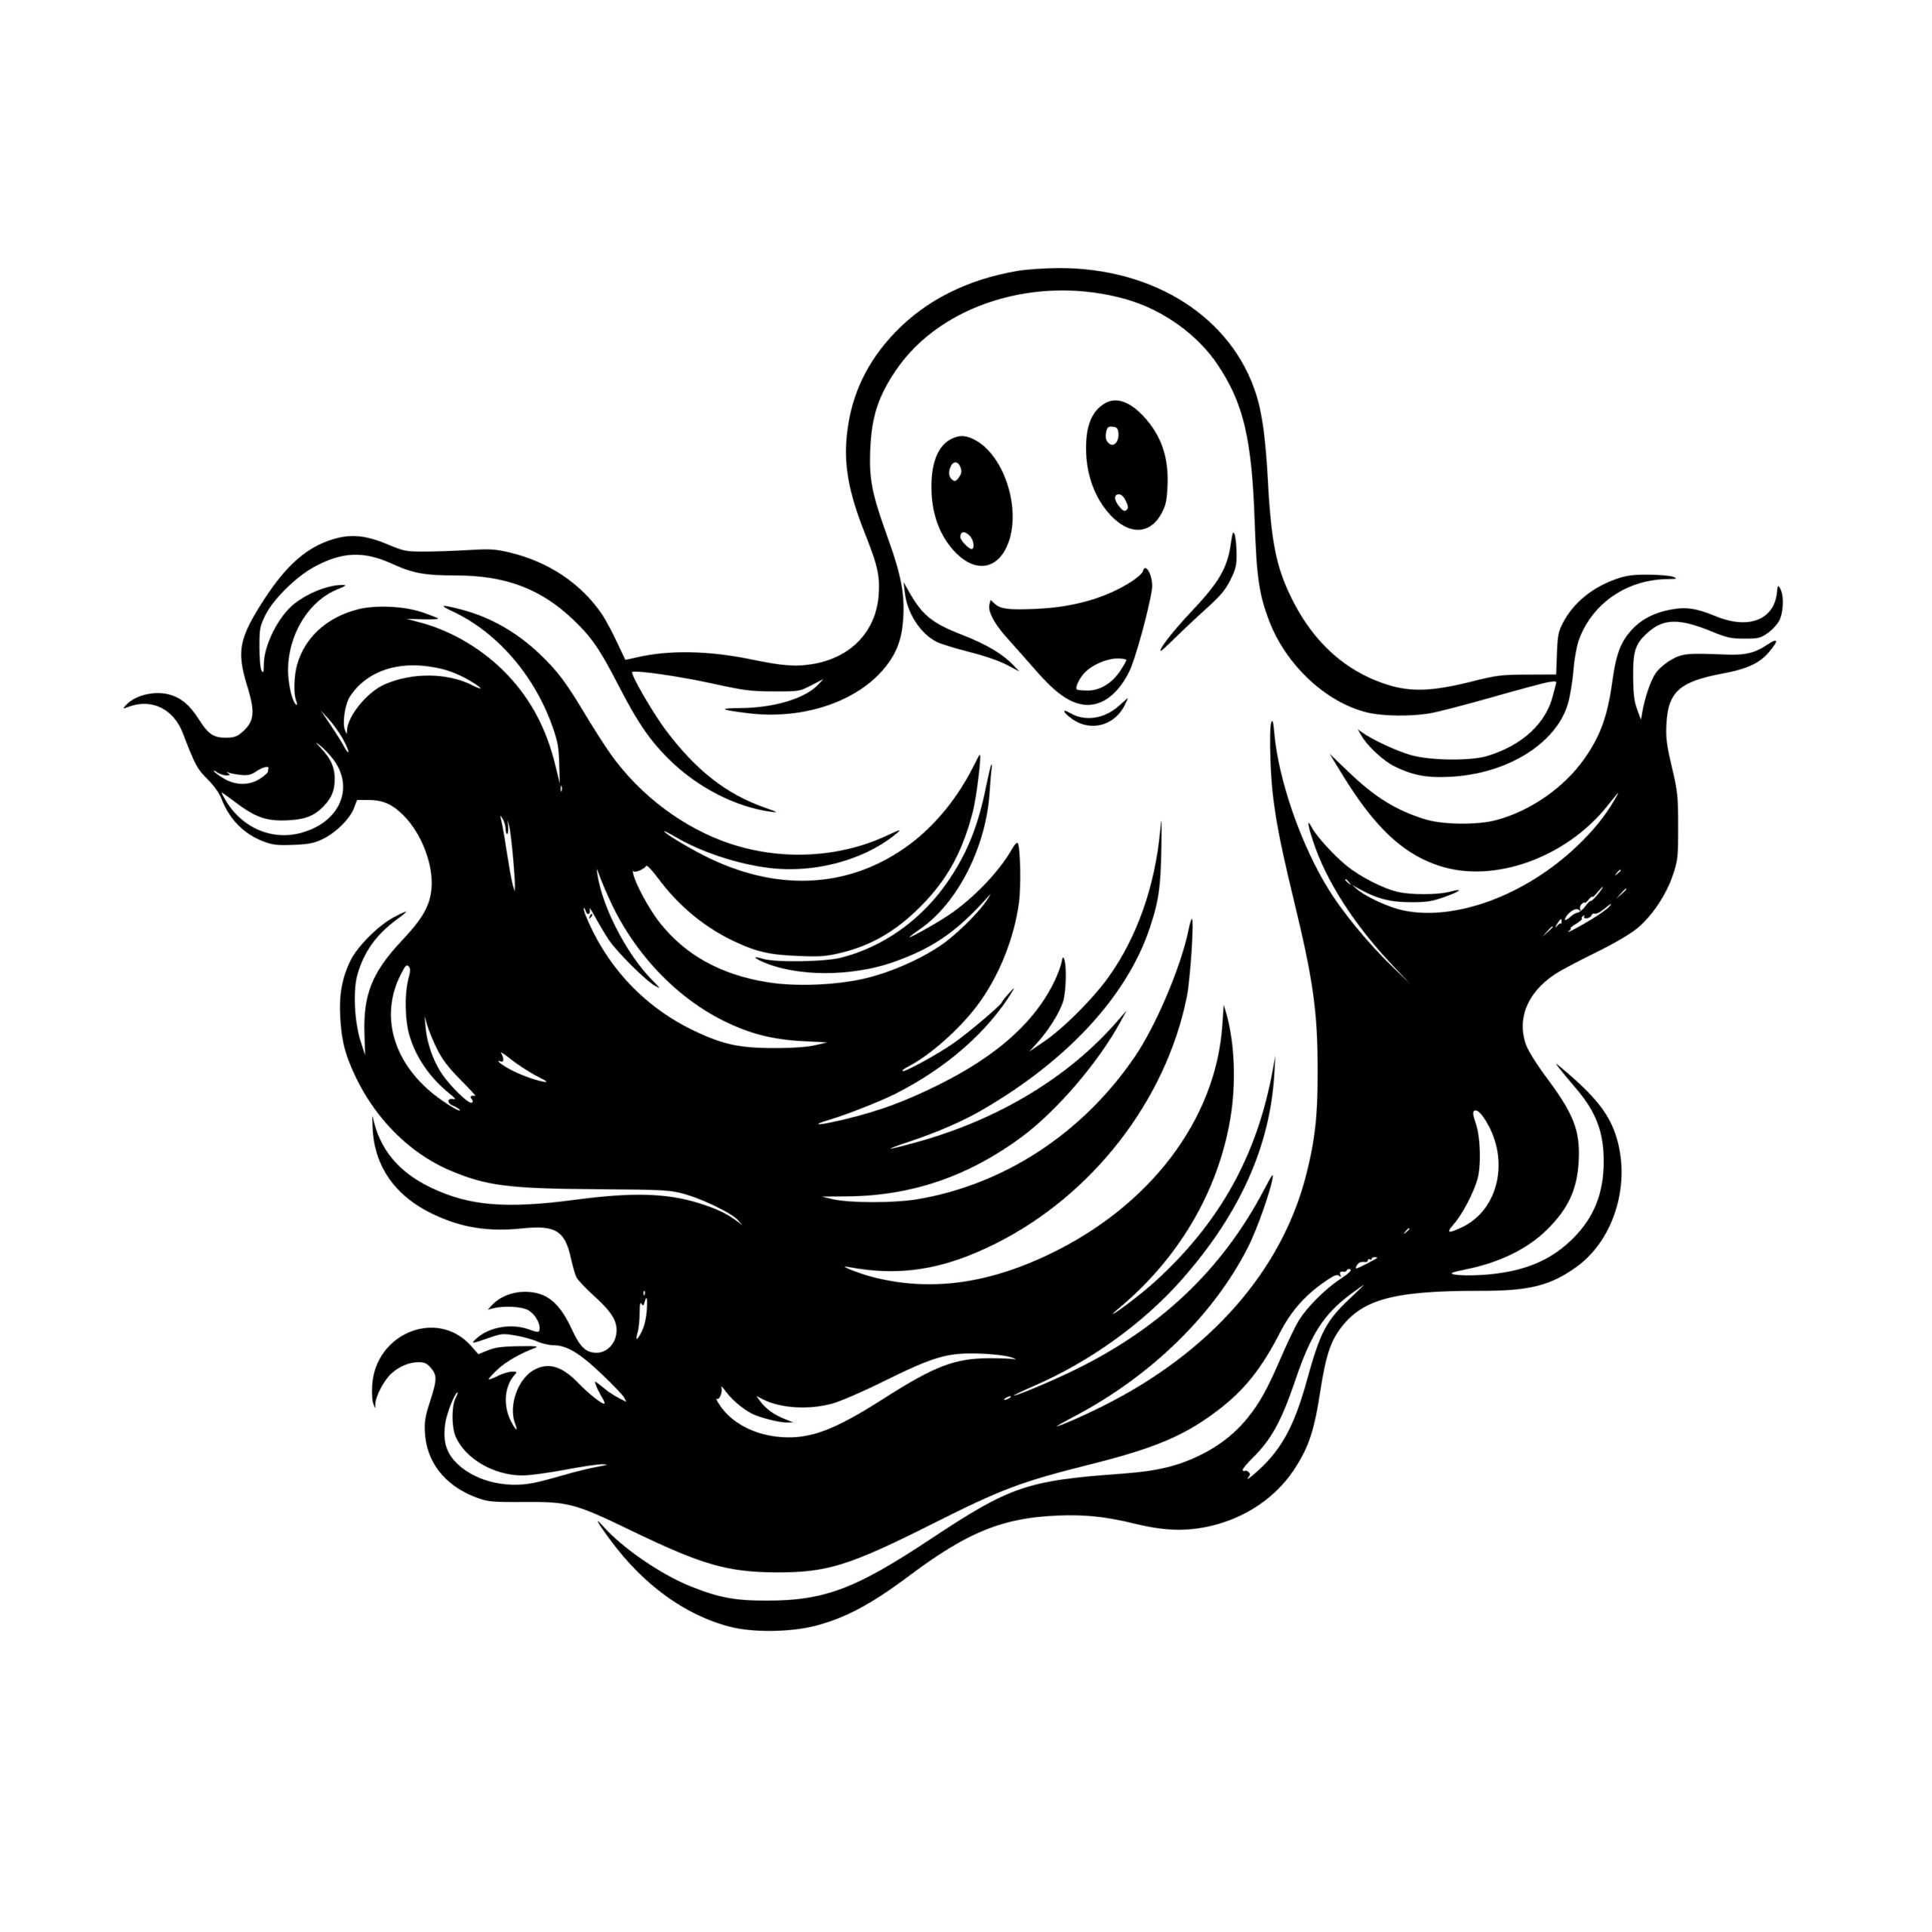 Ghostly Companion SVG File for Cricut, Silhouette, Laser Machines